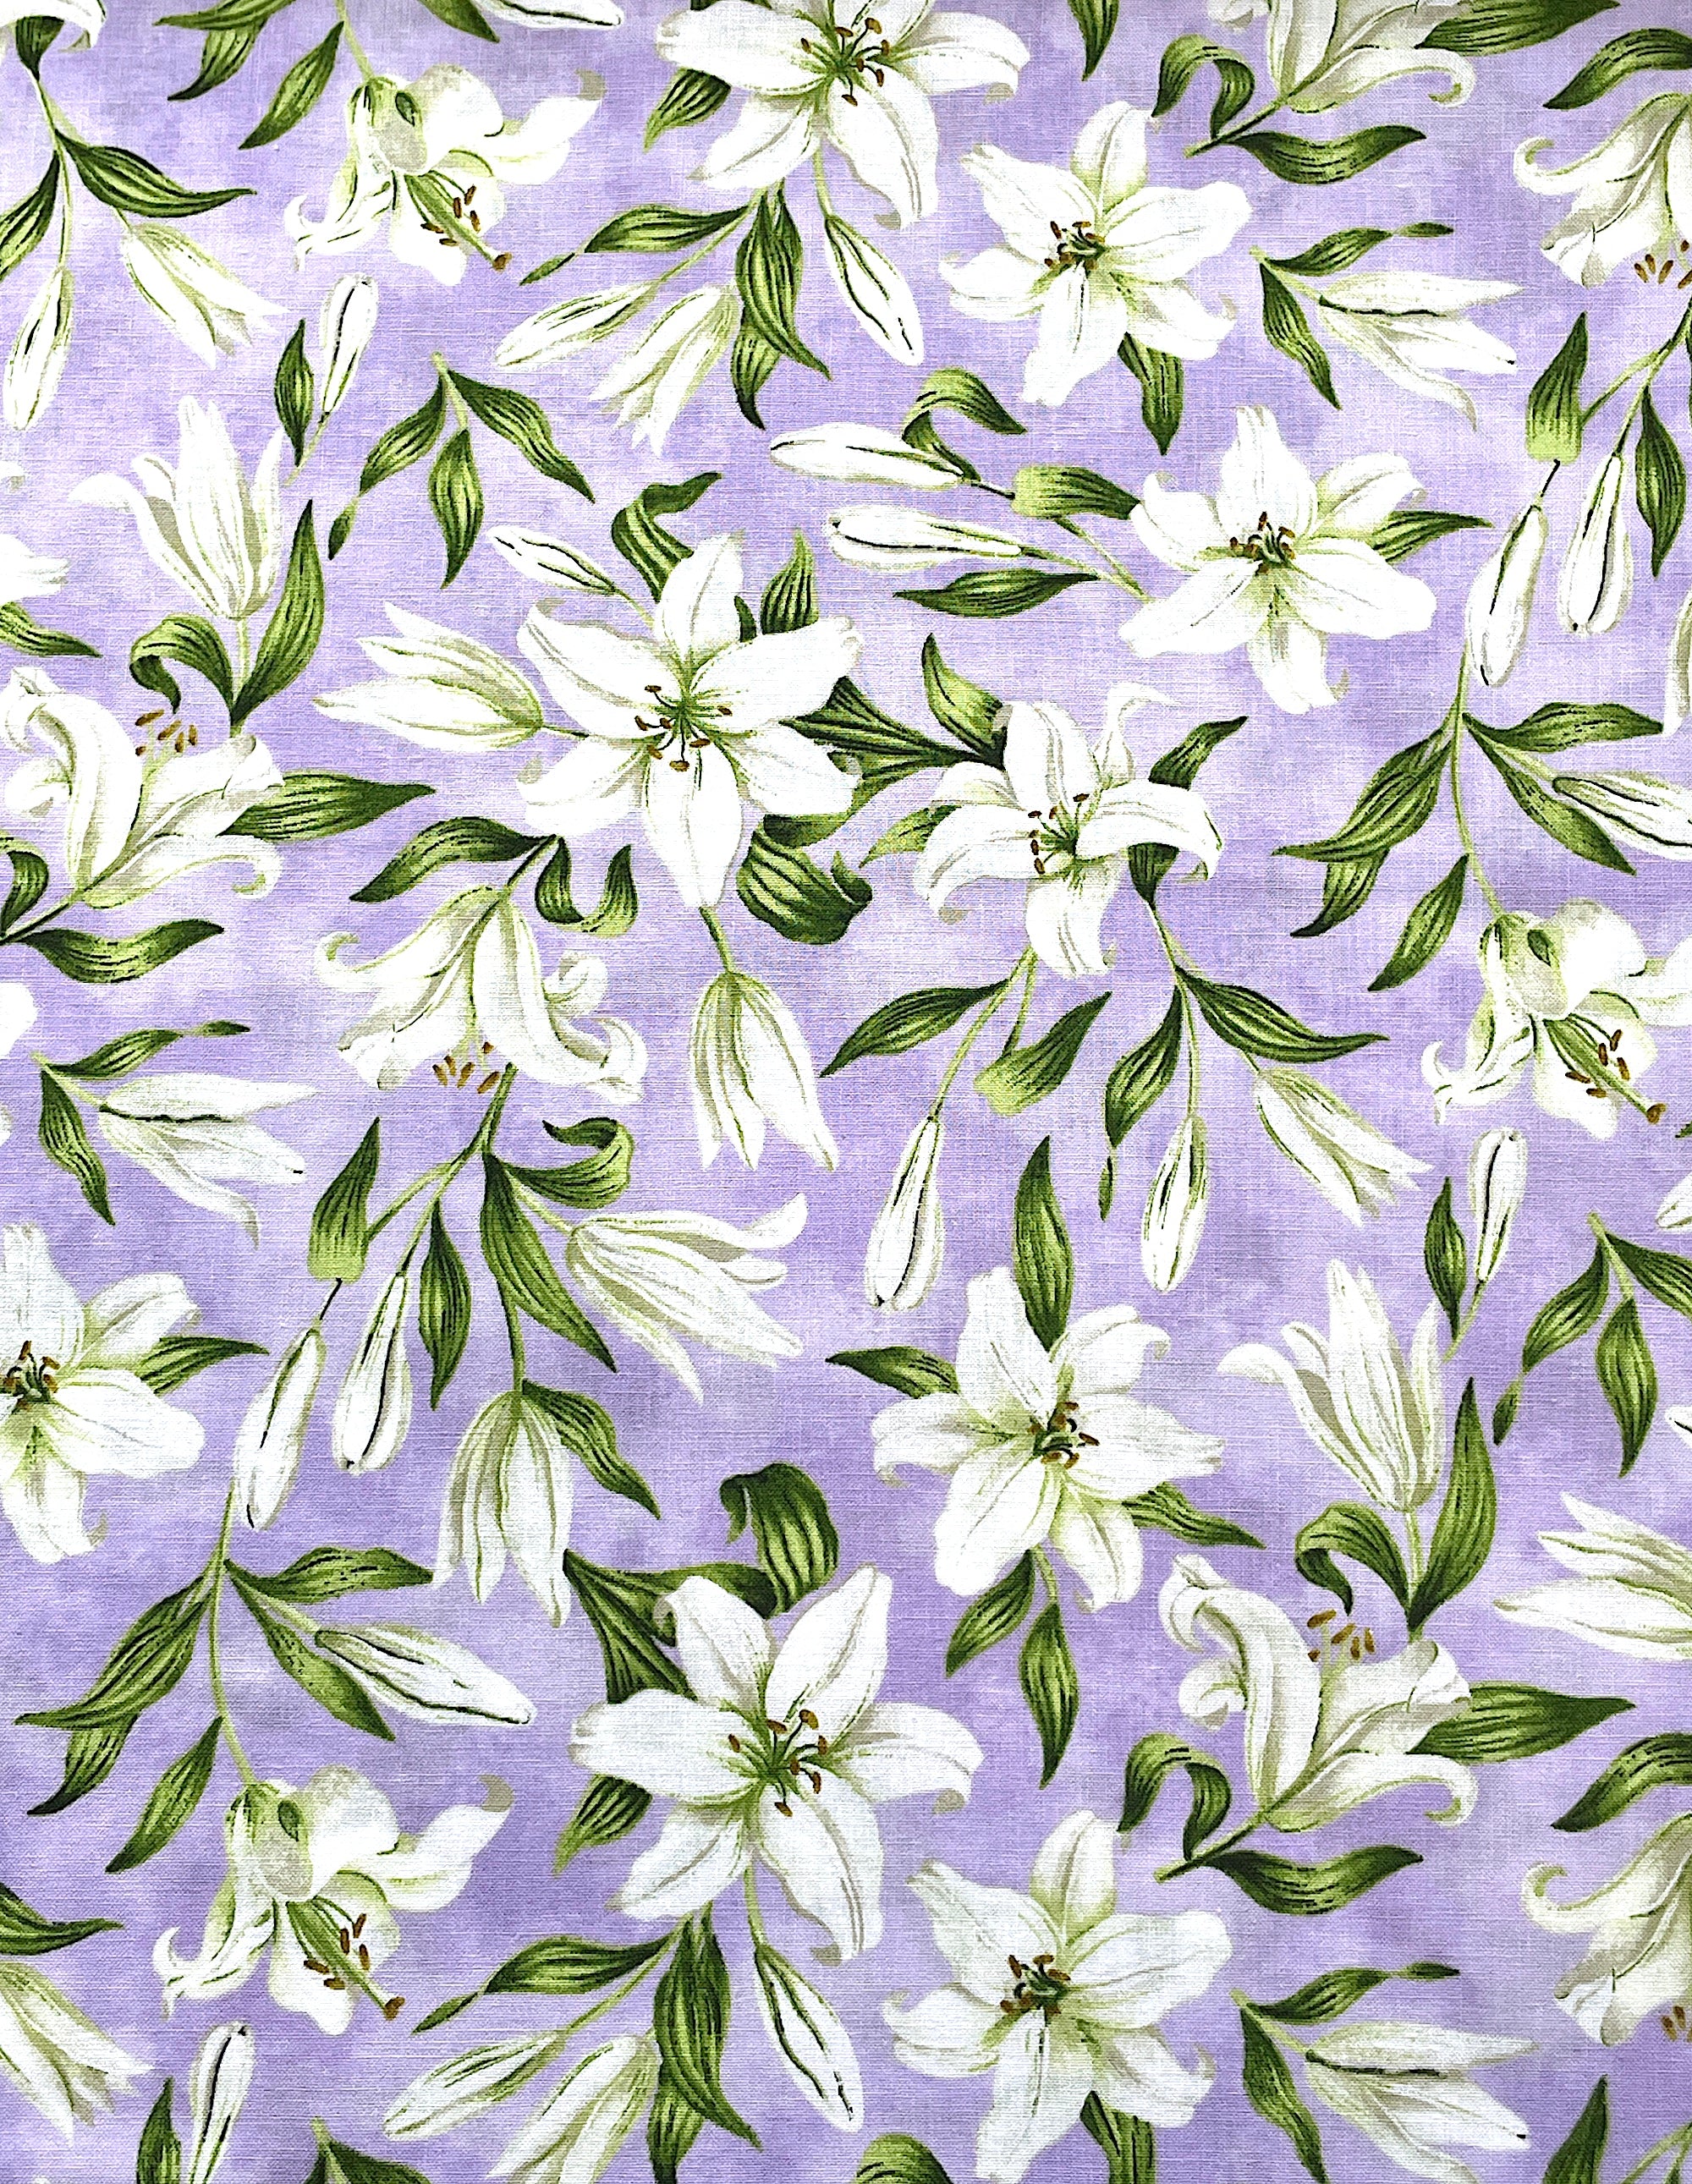 Lavender cotton fabric covered with white lilies.